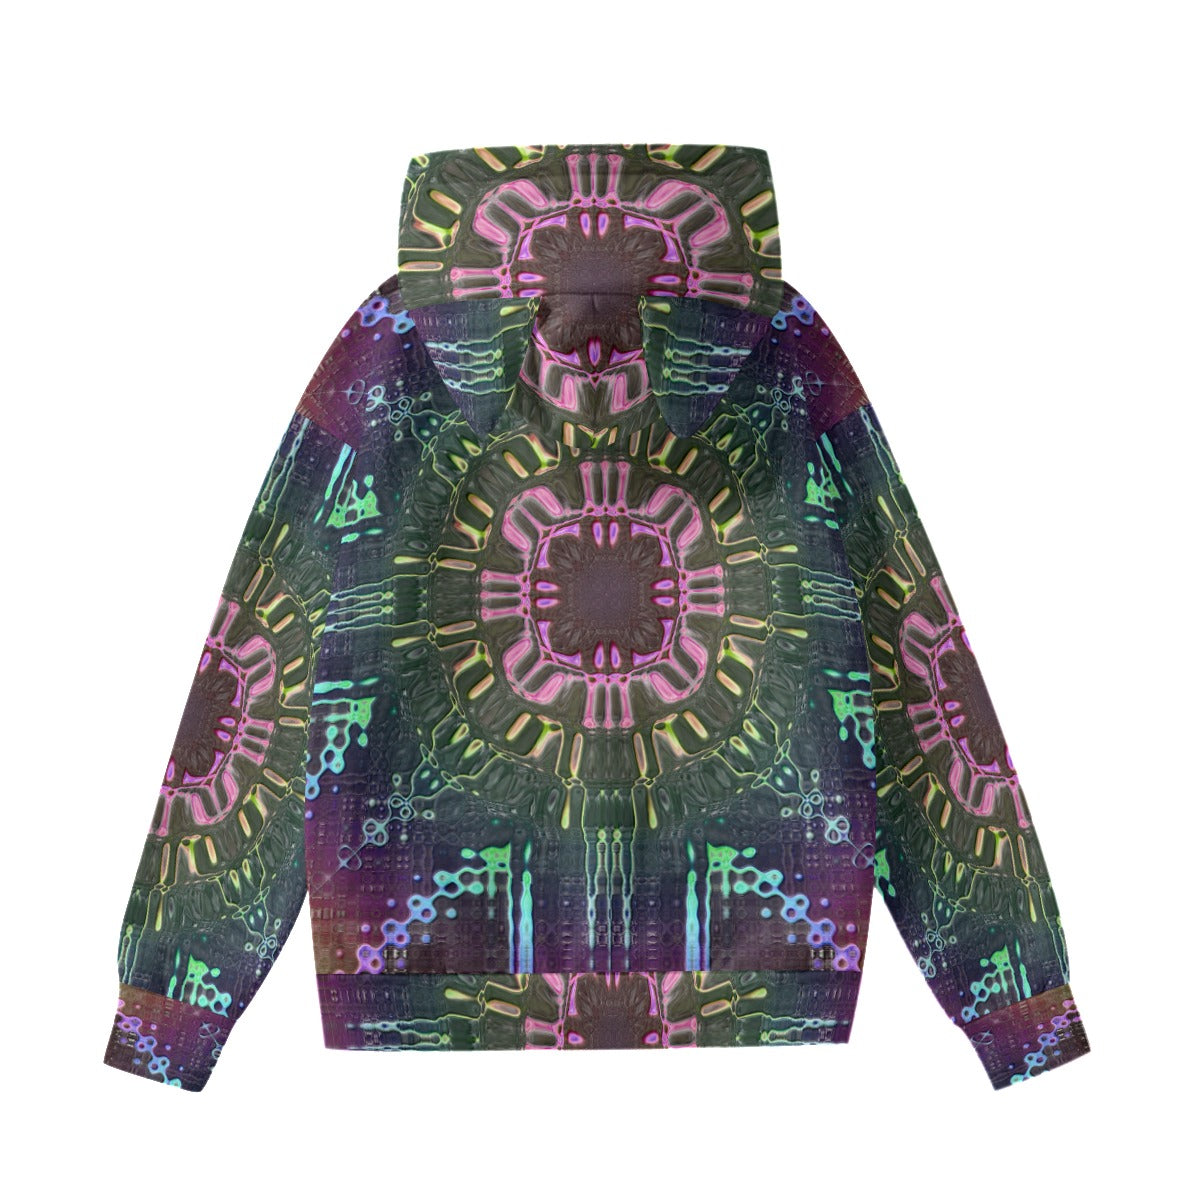 "Polycircuitry" Kitty Couture Hoodie